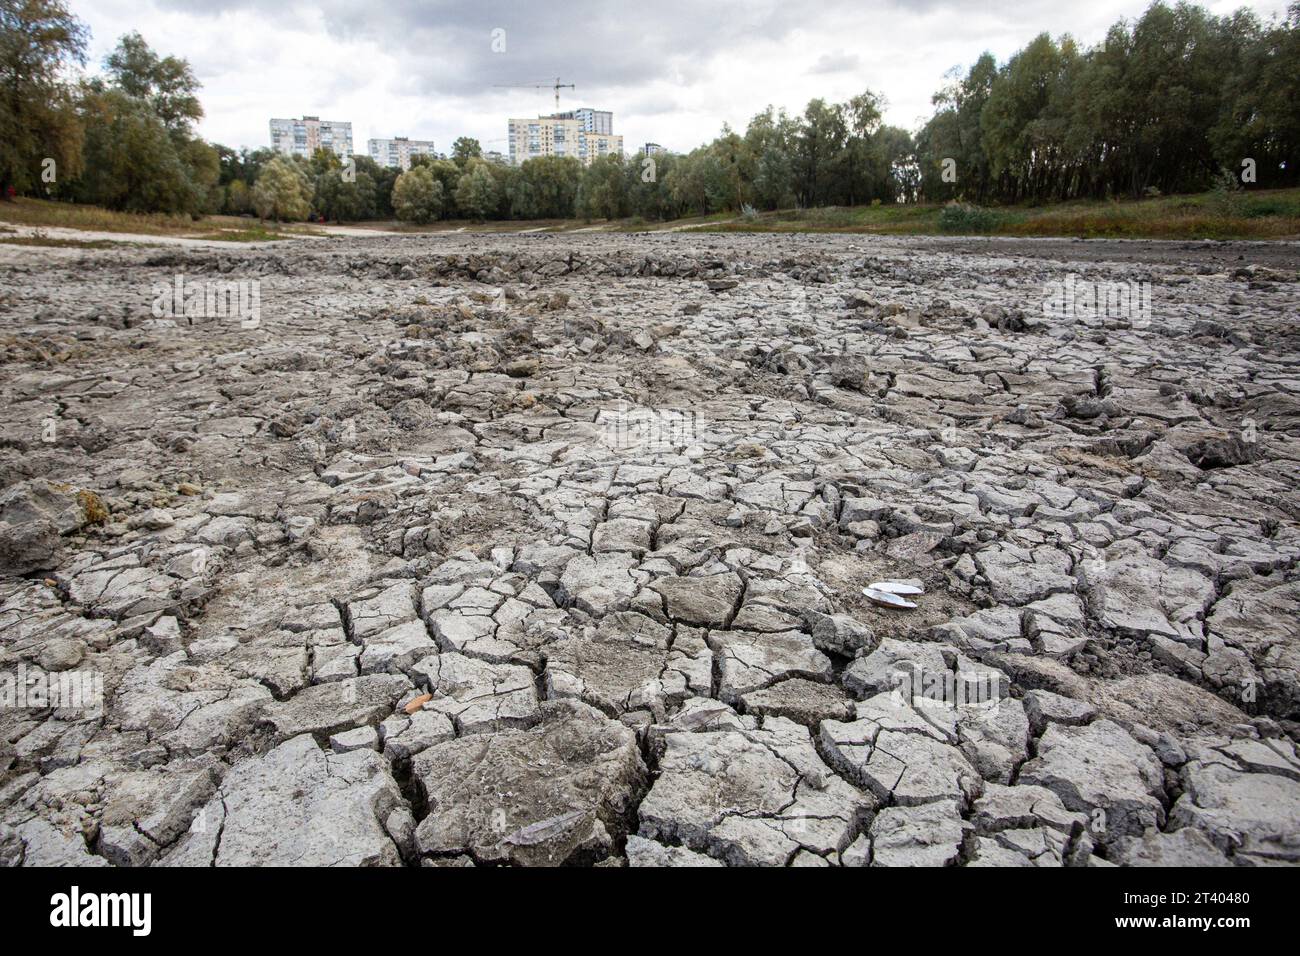 The view of dried Blue Lake in the western part of Kiev,environmental disaster after several years of authoties failing to fund drenage, water supply Stock Photo